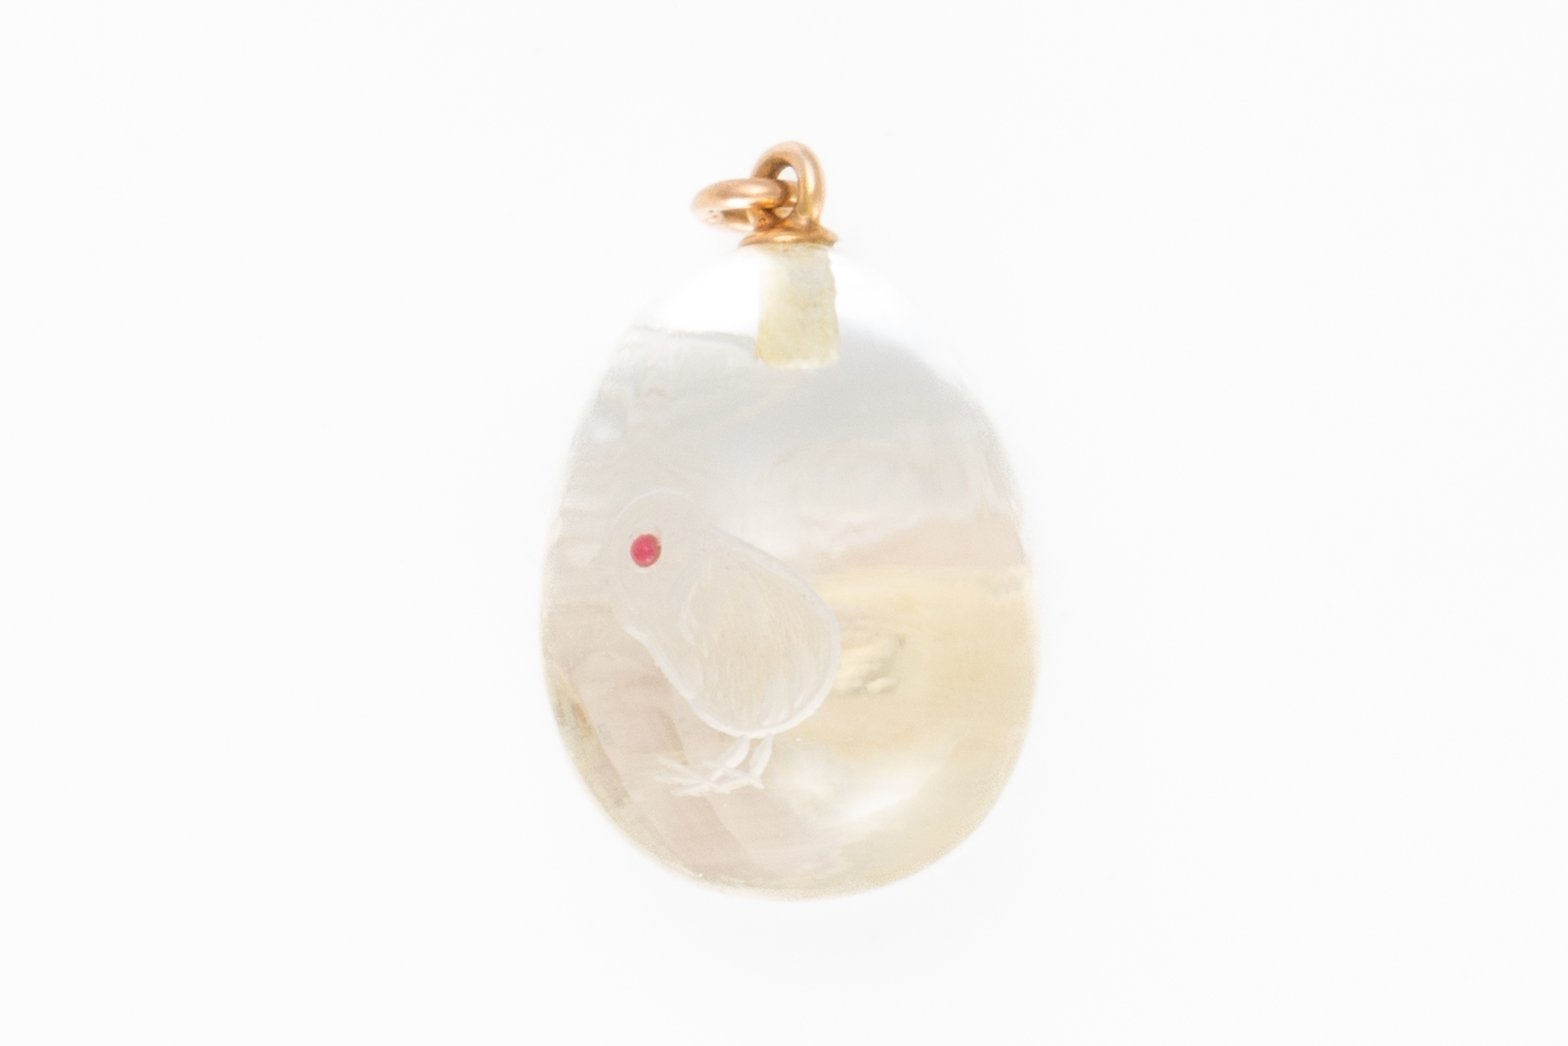 AN EARLY 20TH CENTURY ROCK CRYSTAL AND RUBY EGG CHARM - Image 2 of 2